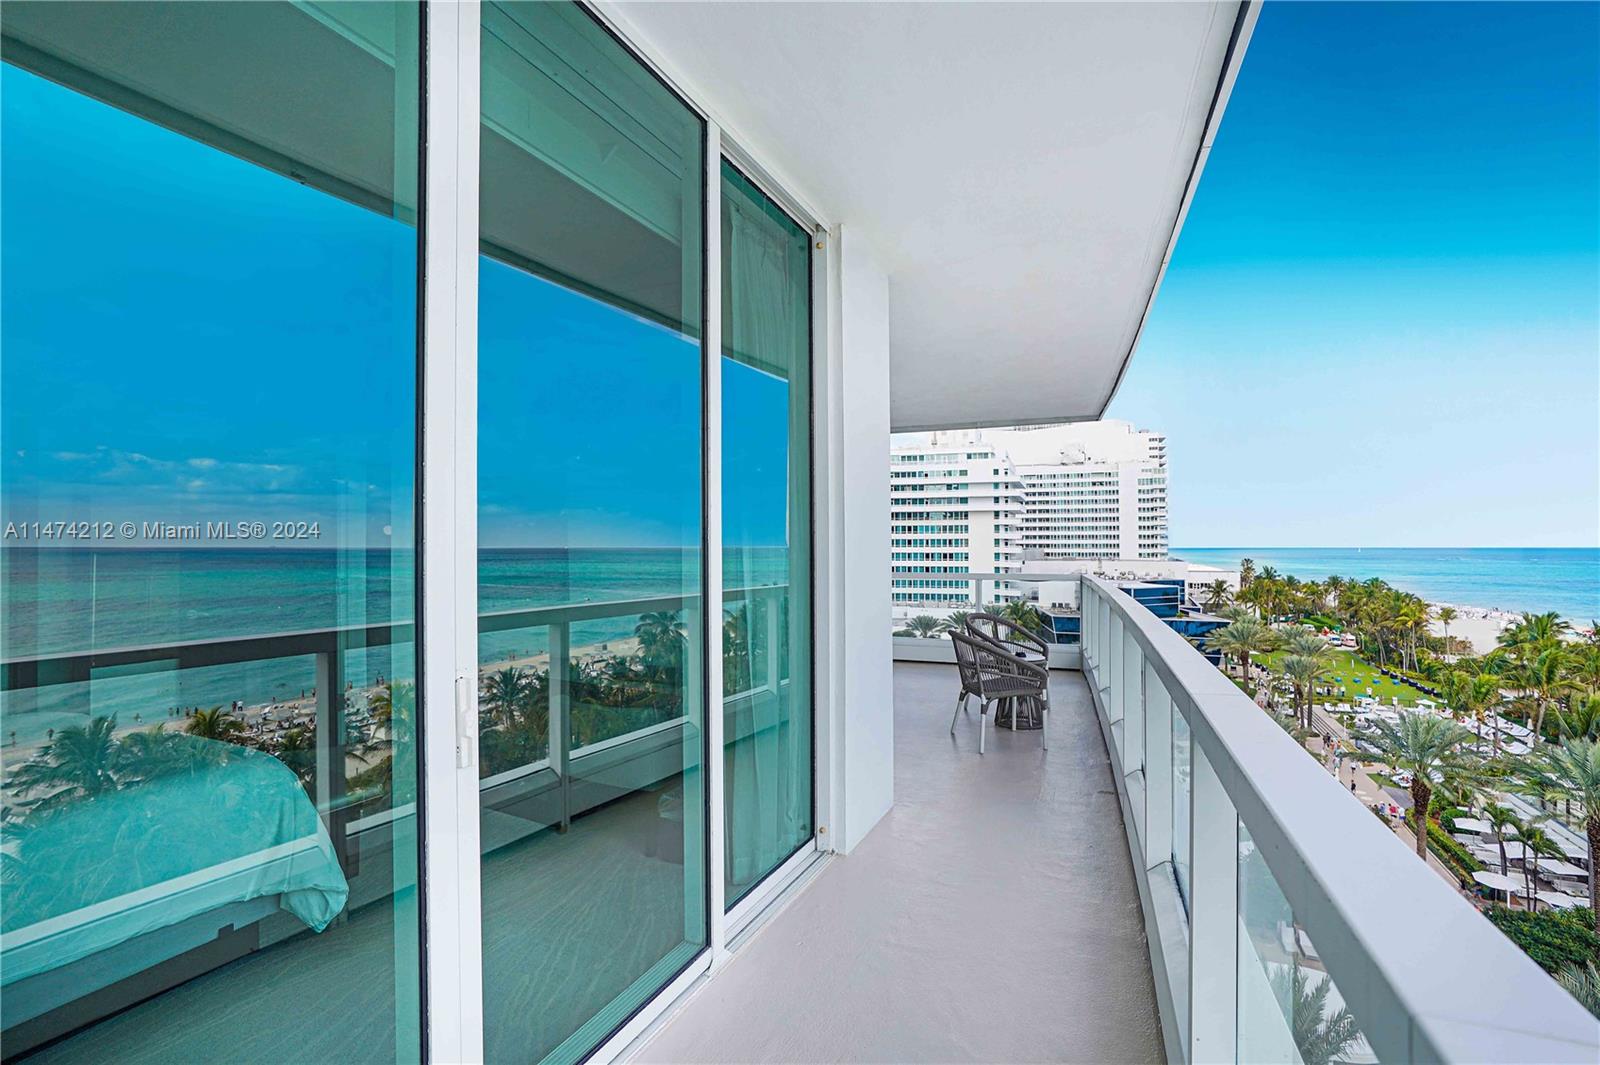 4391 Collins Ave Unit 709, Miami Beach, Florida, 33140, United States, 1 Bedroom Bedrooms, ,2 BathroomsBathrooms,Residential,For Sale,4391 Collins Ave Unit 709,1394803